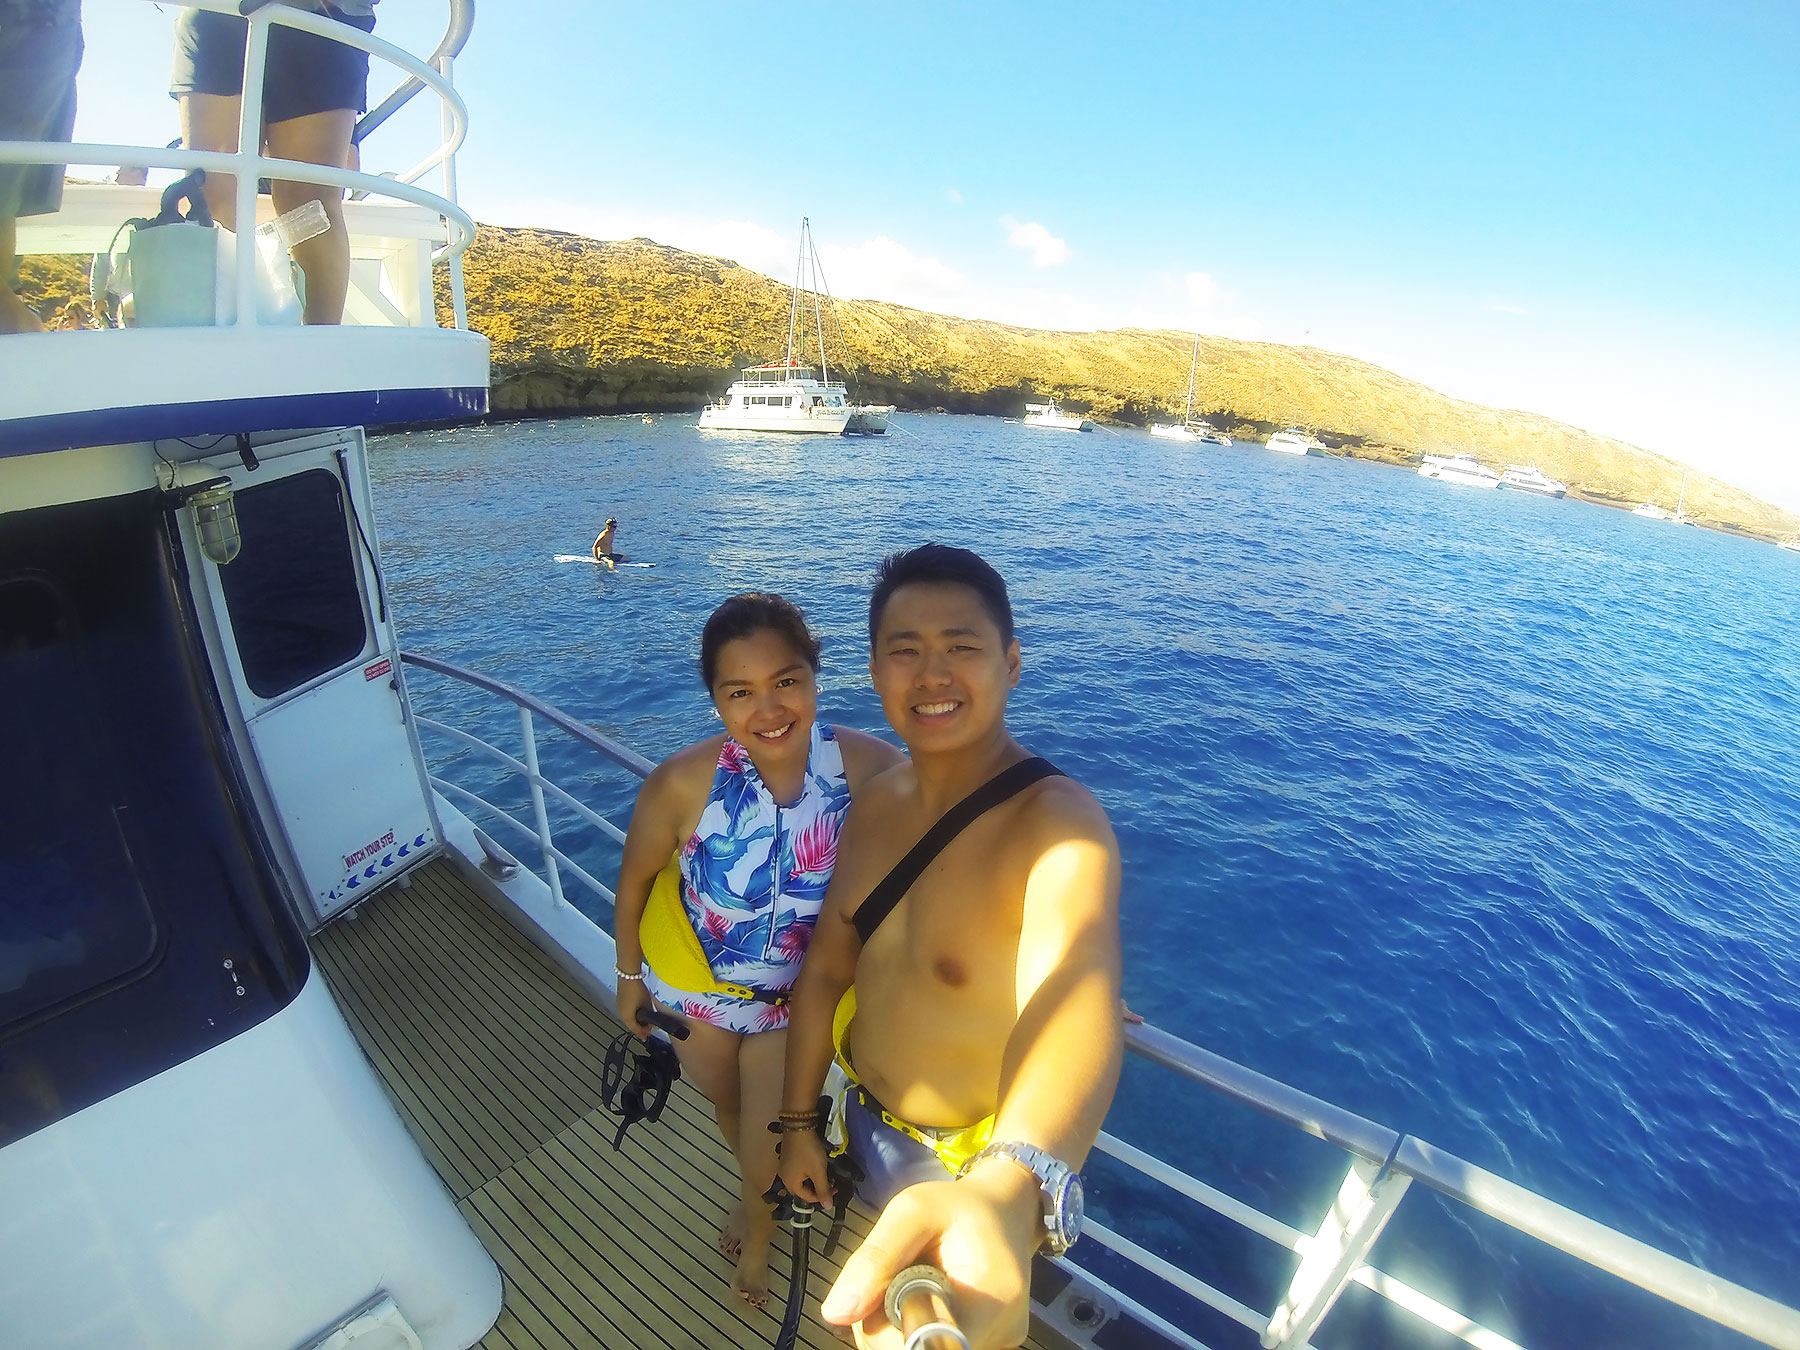 Riding the Pride of Maui at Molokini Crater - PearlMargaret.com